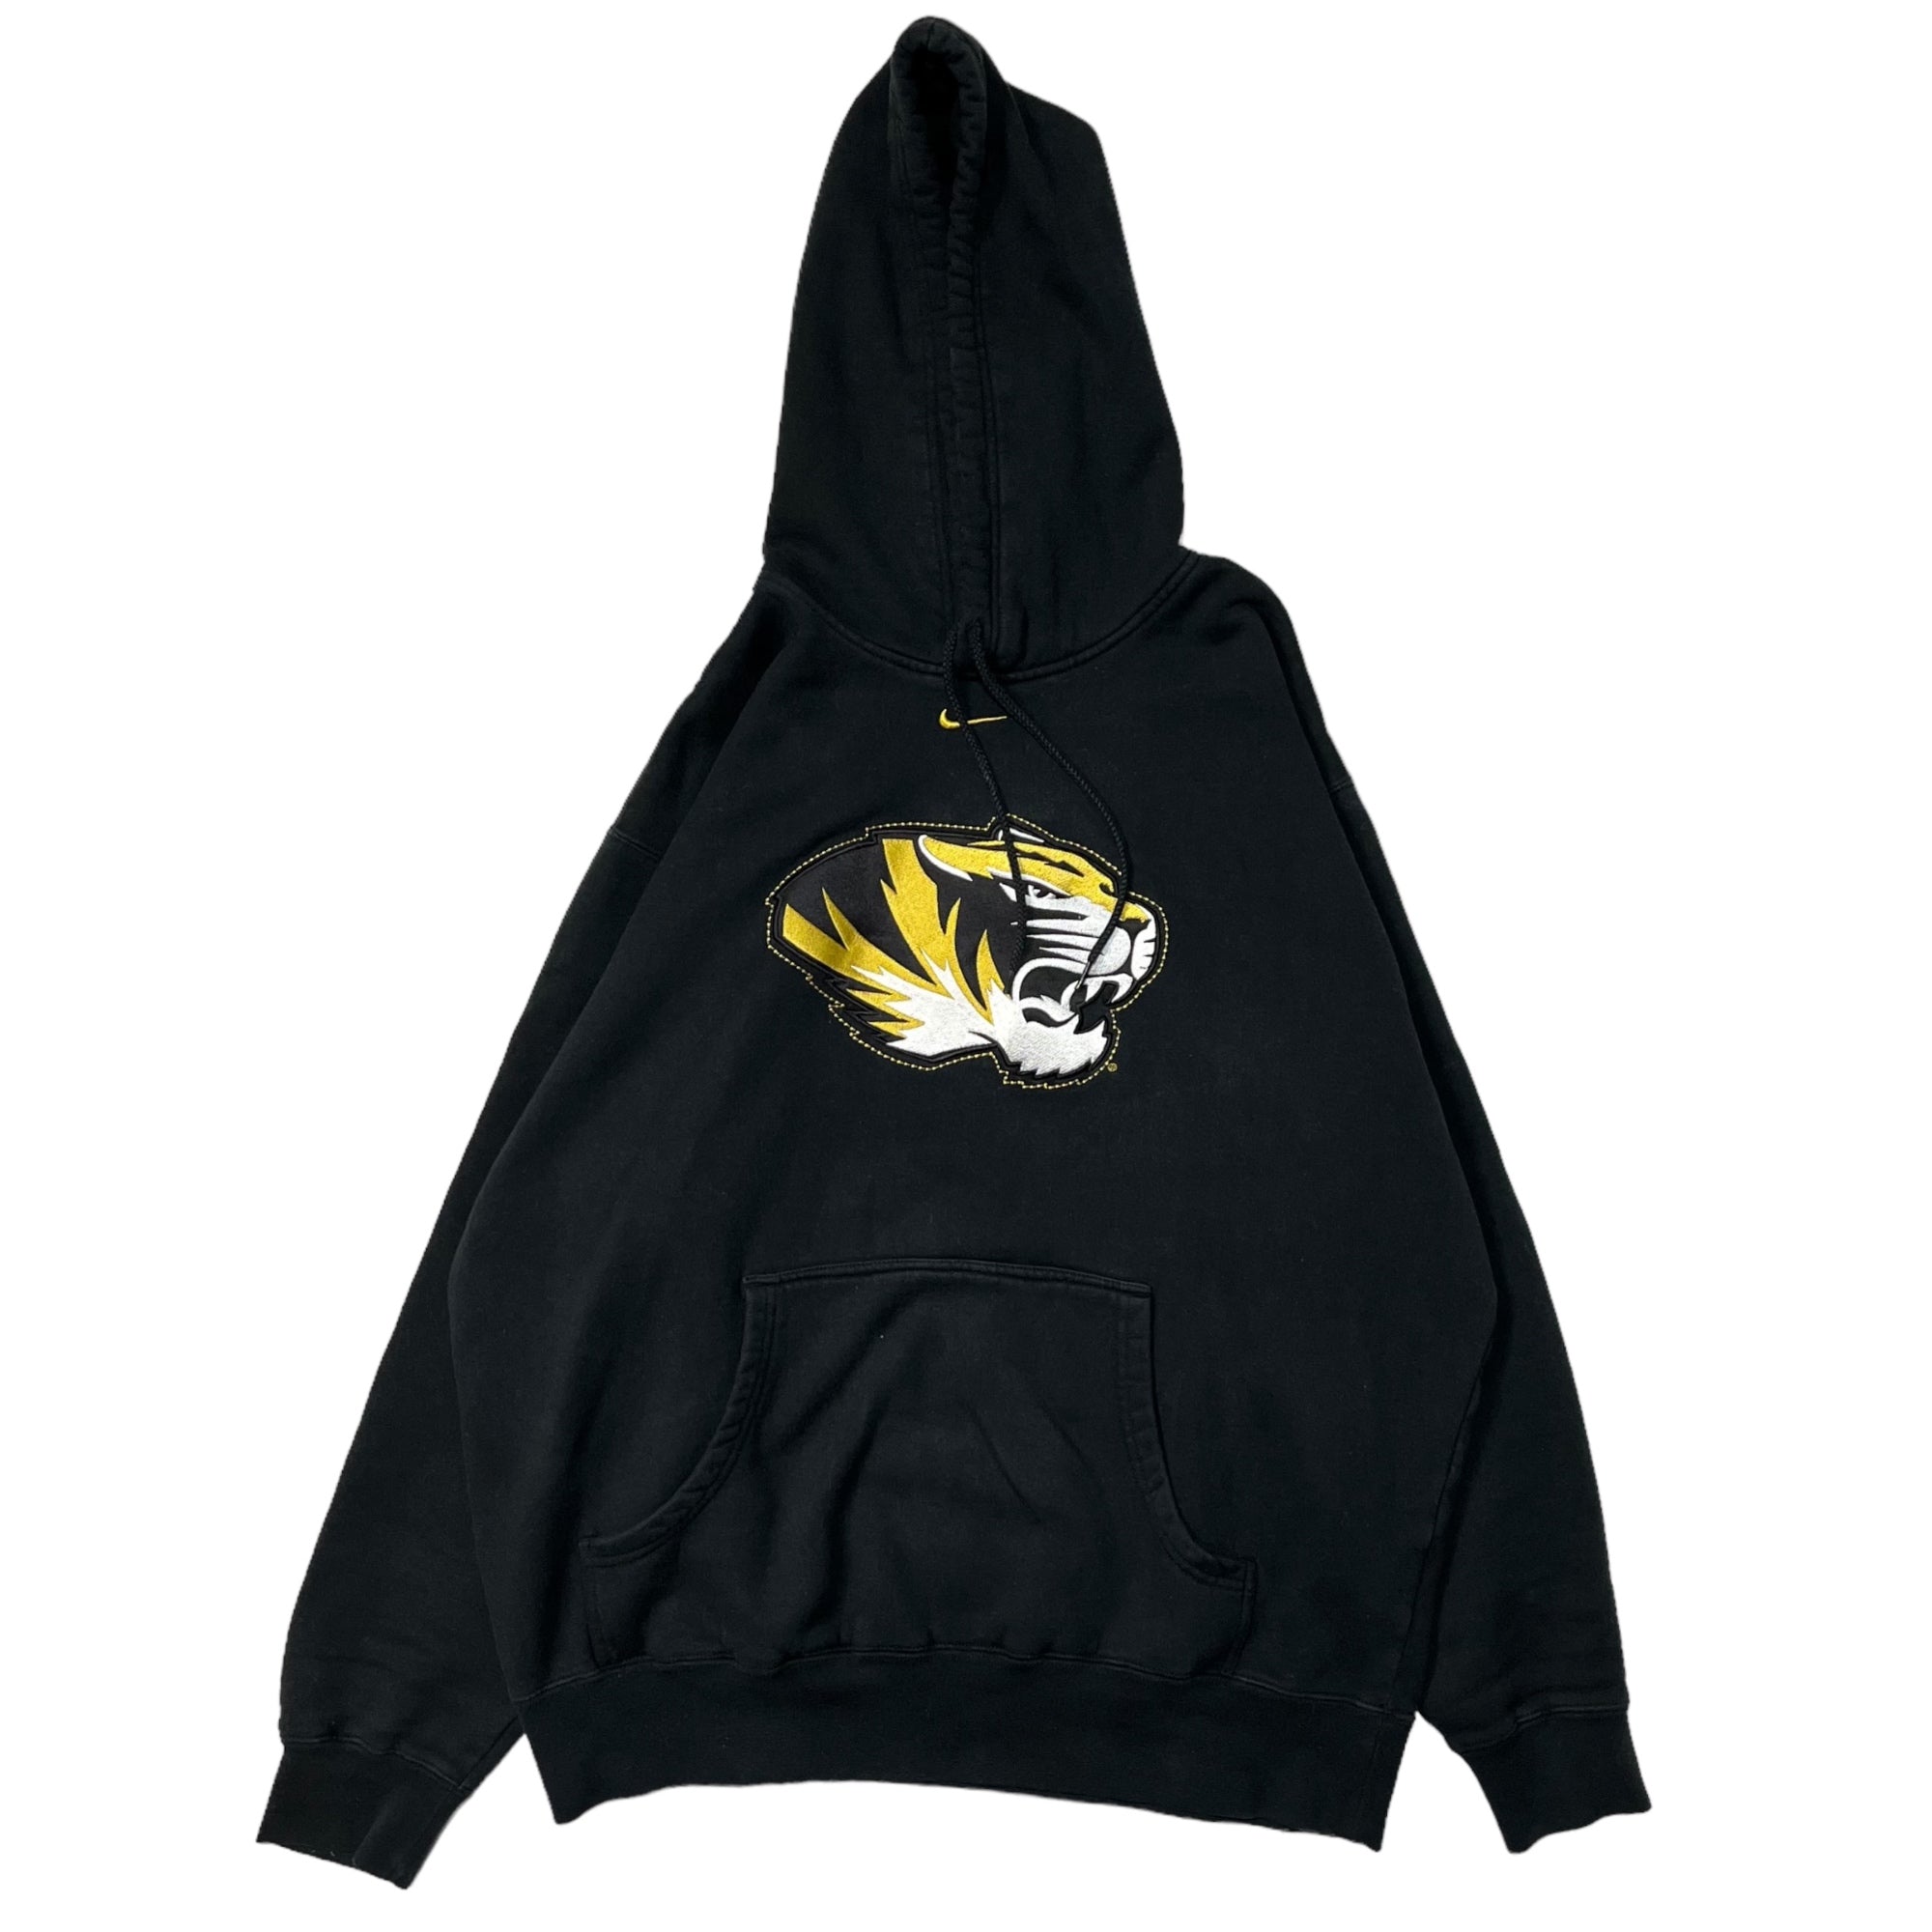 NIKE(ナイキ) 00's tiger embroidery pullover hoodie L ブラック×イエロー